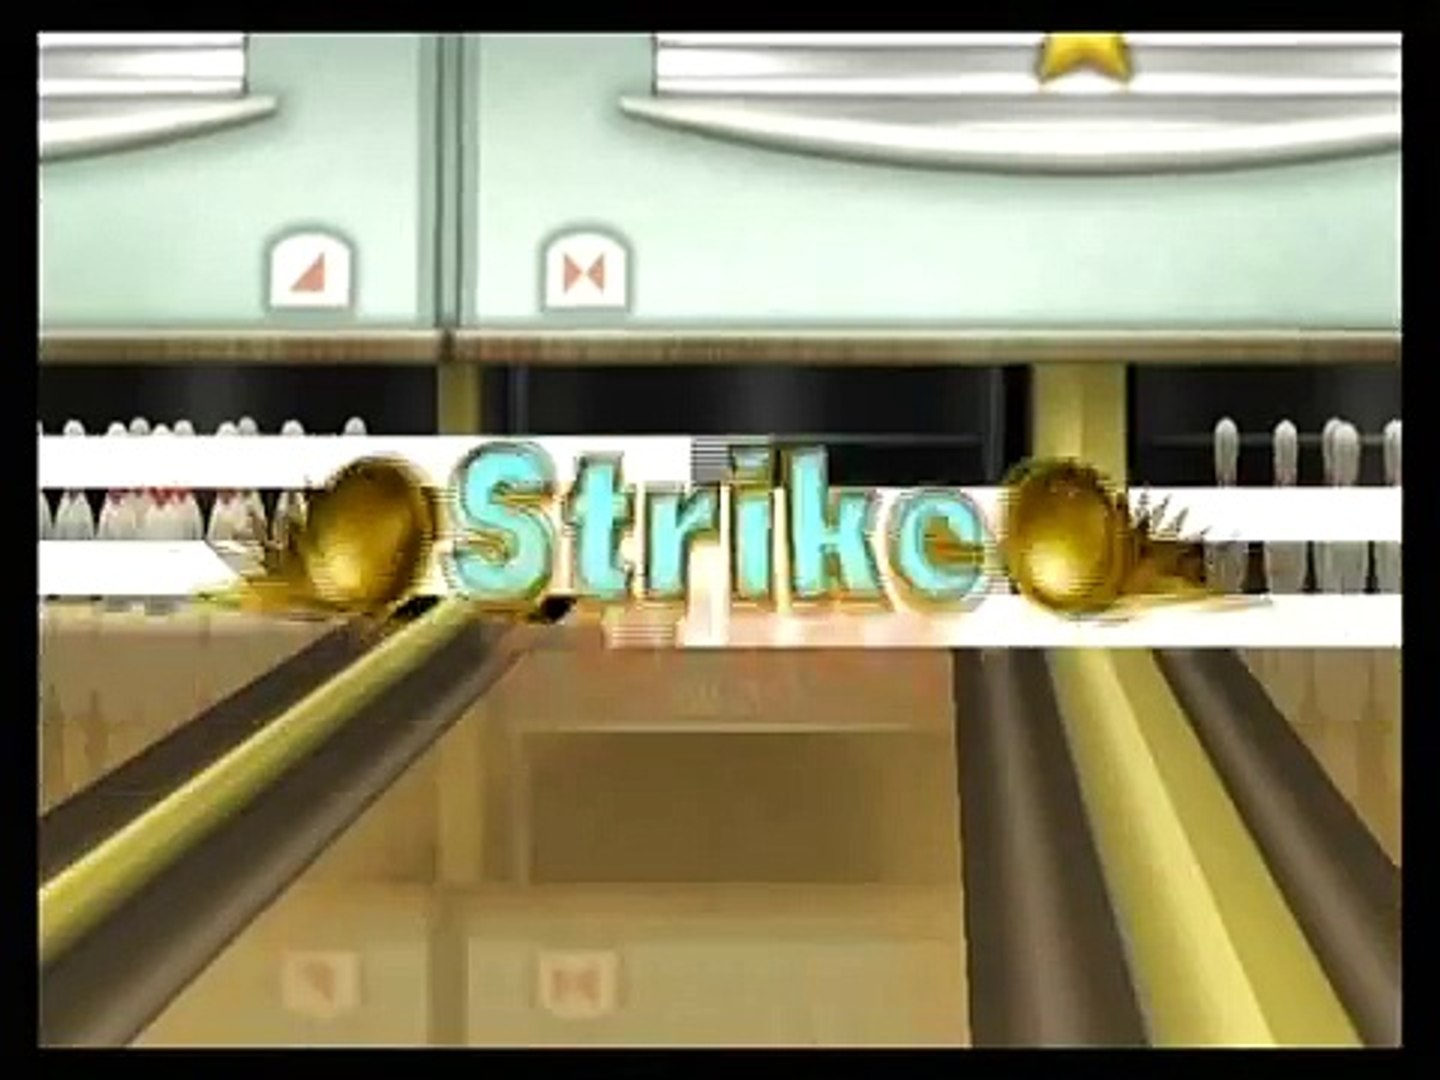 Wii Sports - Bowling 8 strikes in a row - video Dailymotion